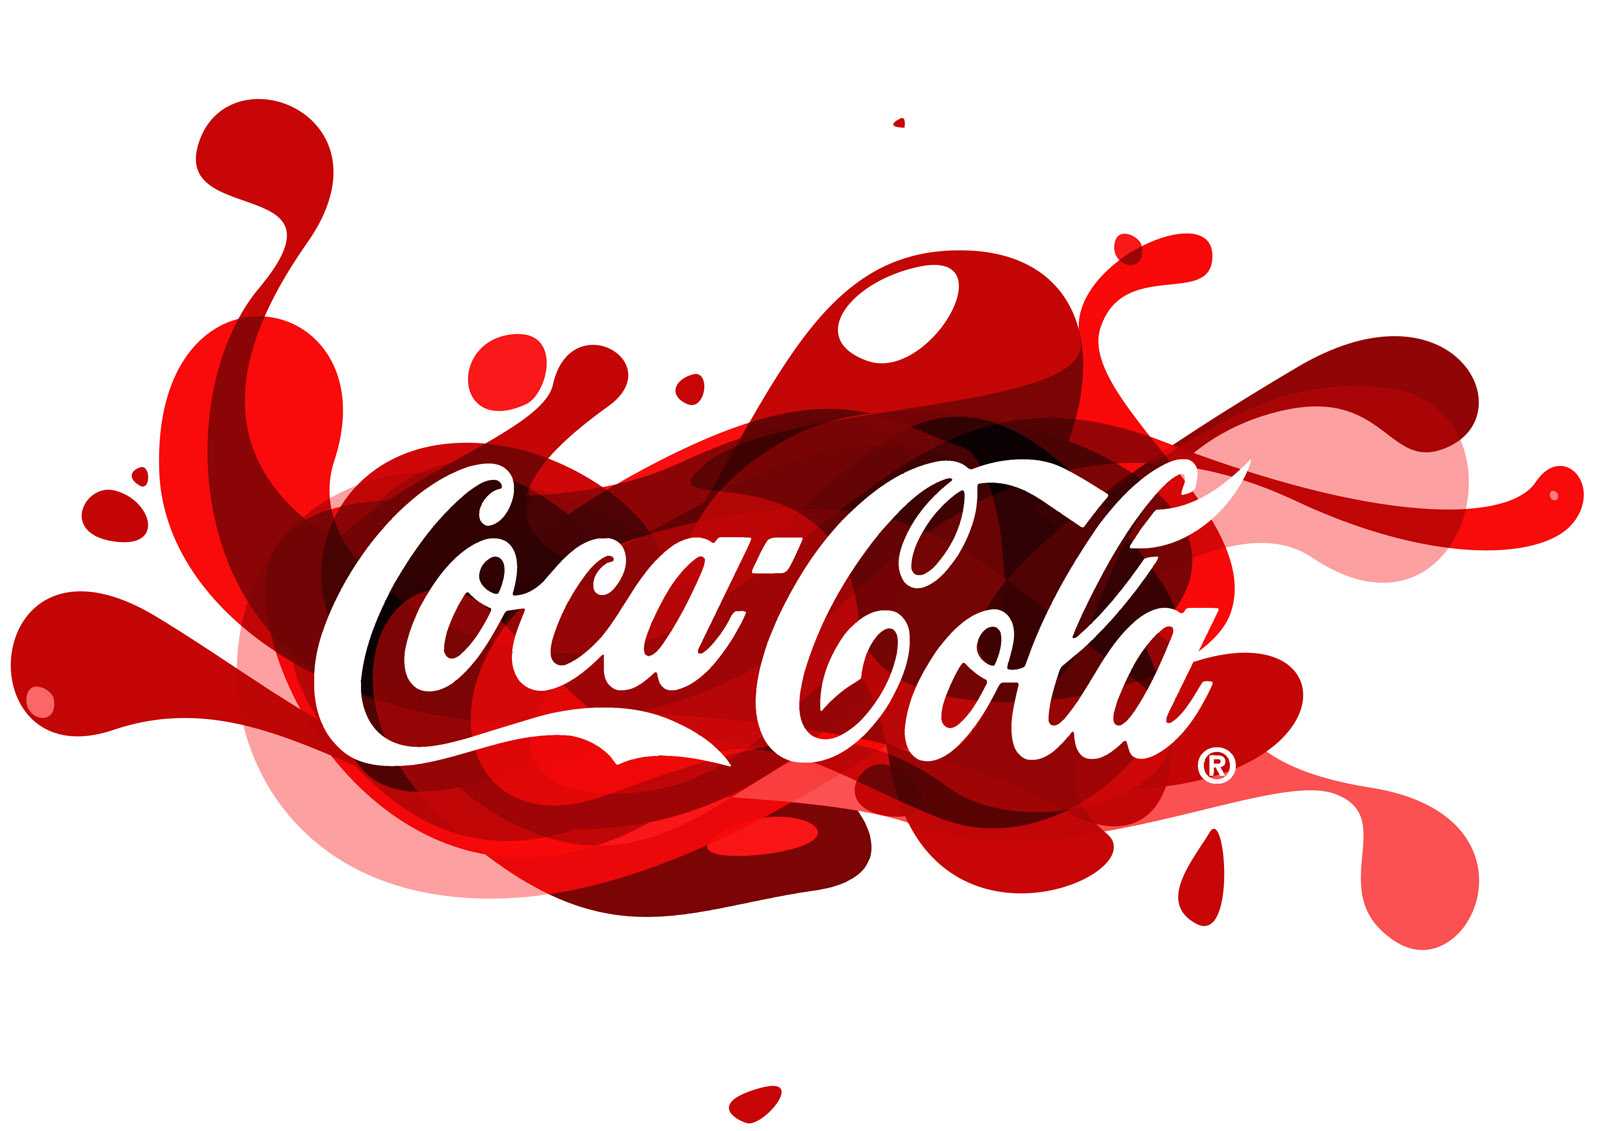 Coca Cola Free Ppt Backgrounds For Your Powerpoint Templates Pertaining To Coca Cola Powerpoint Template